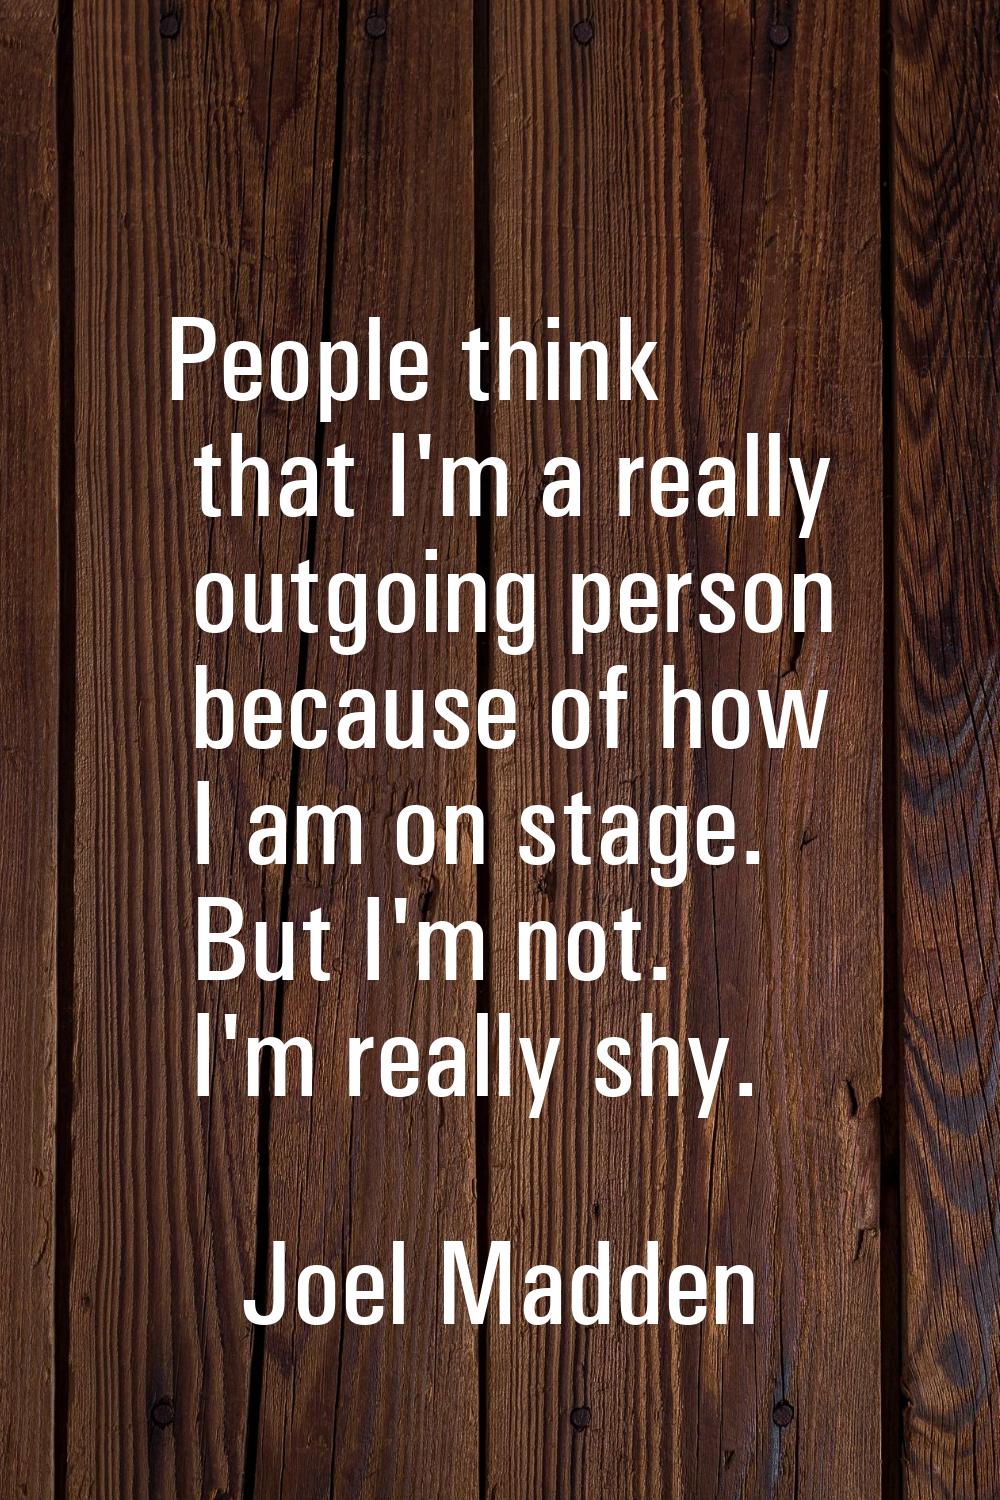 People think that I'm a really outgoing person because of how I am on stage. But I'm not. I'm reall